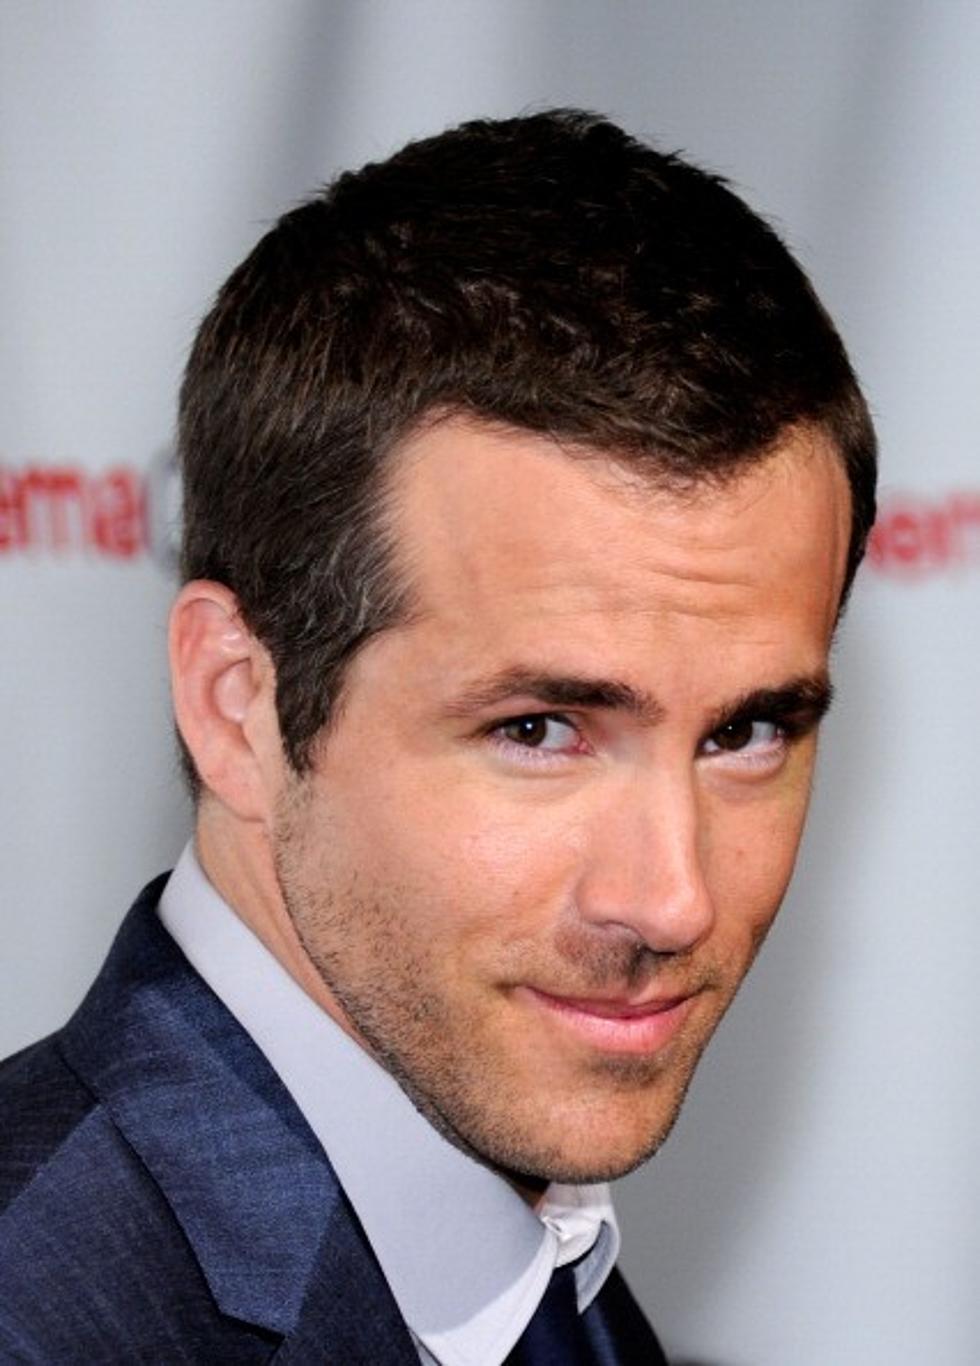 Ryan Reynolds Says Dating Is “Alien” To Him